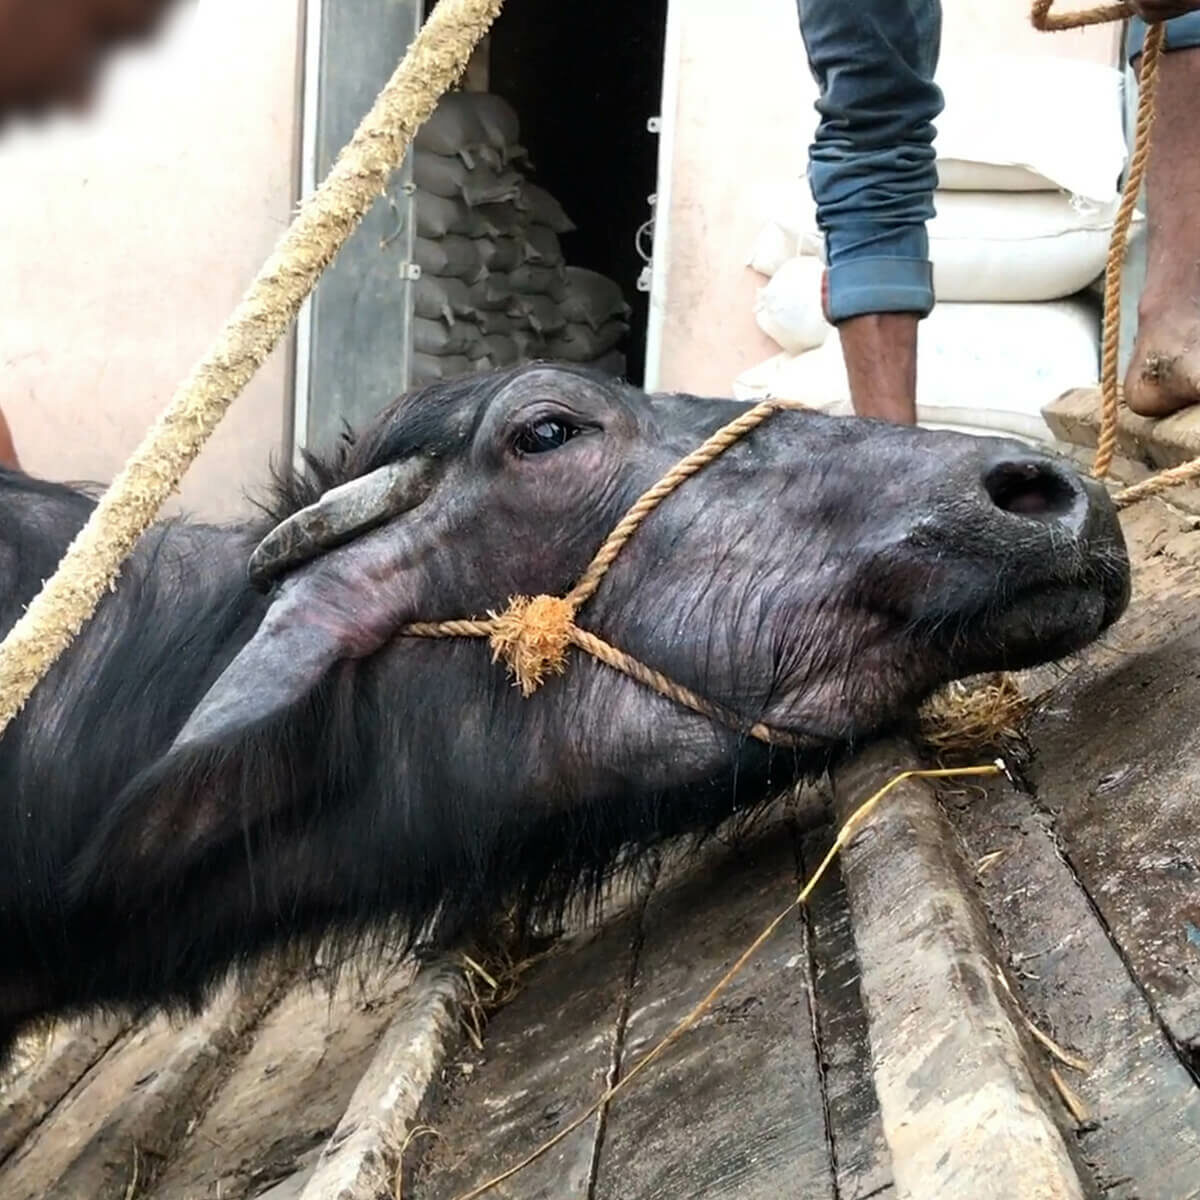 buffalo in India being forcibly pulled by a rope onto a truck to be taken to a slaughterhouse